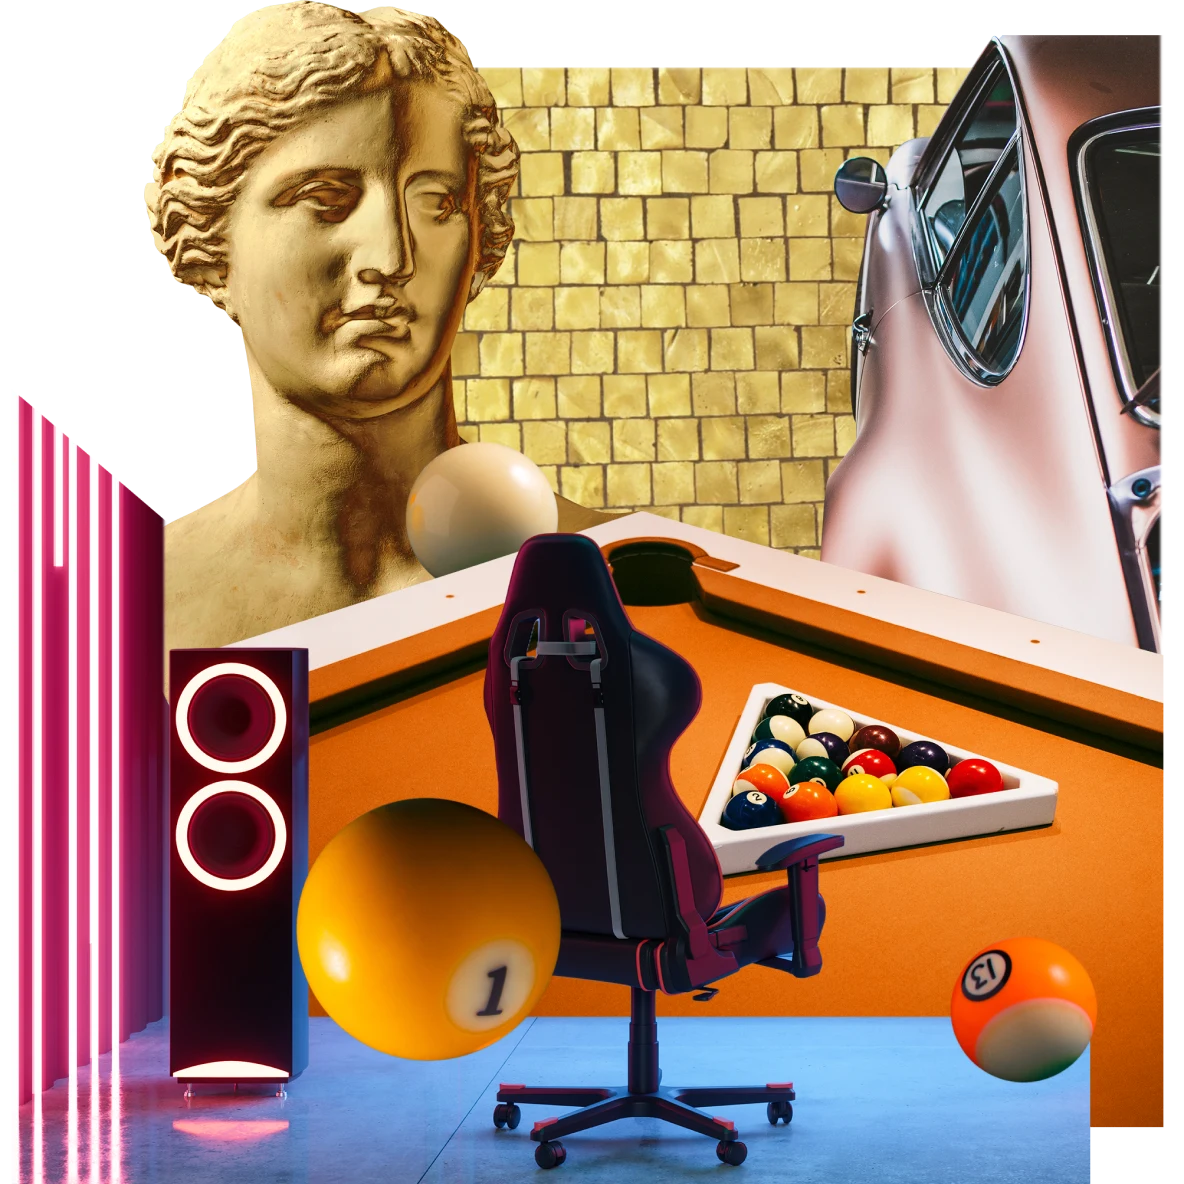 Collage of games room items. A golden Roman bust is at the back, near a light purple vintage car, against a gold brick wall. A deep red office chair is in front of an orange pool table with racked billiard balls and neon speakers on the left.